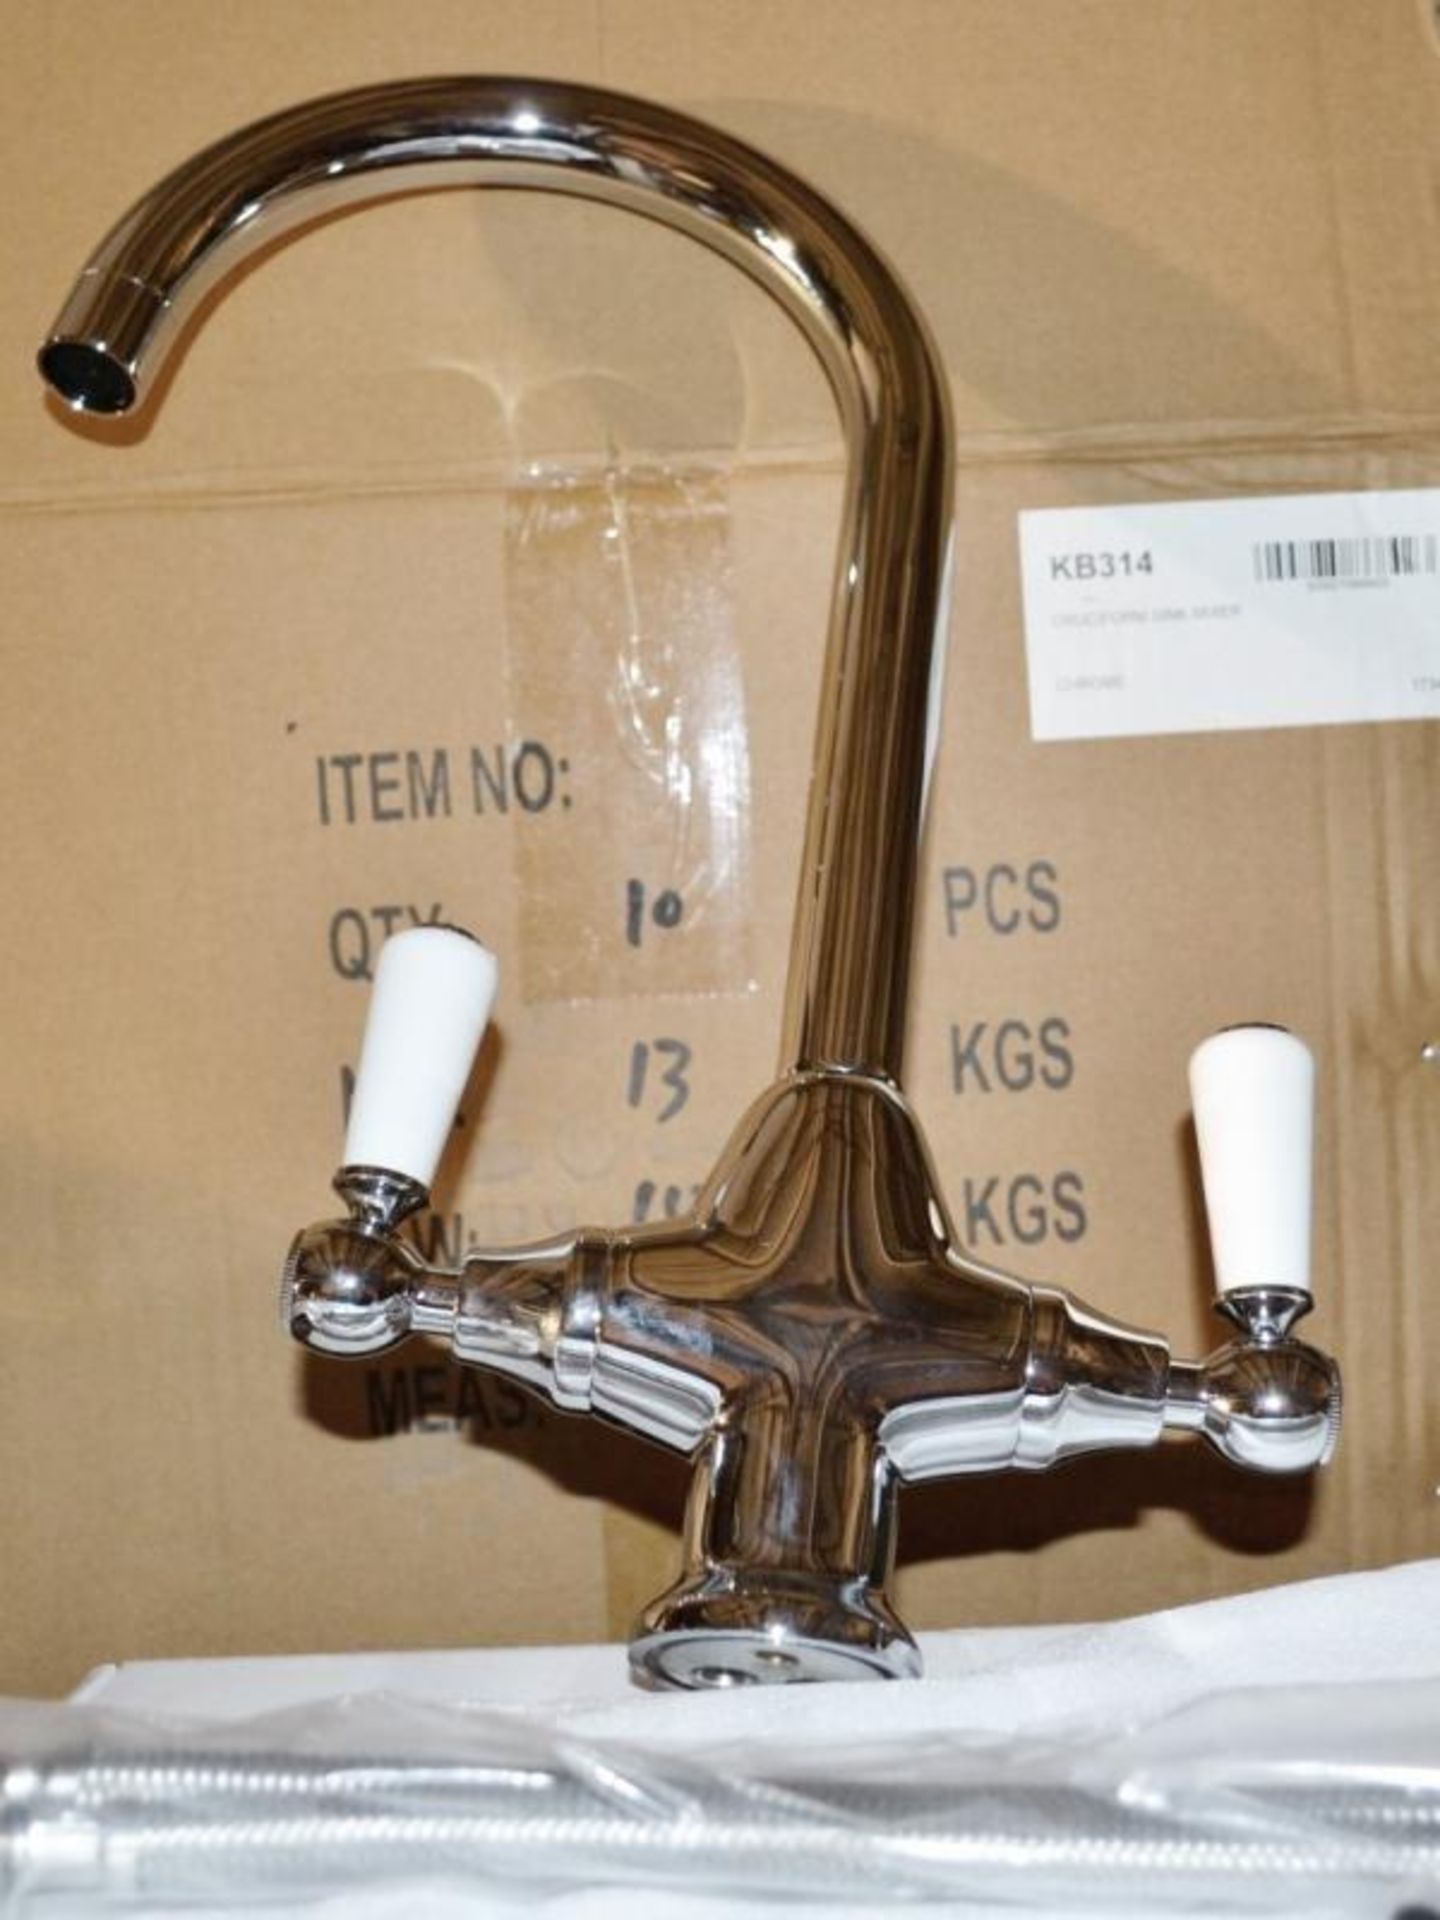 1 x Old London Cruciform Kitchen Deck Mounted Sink Mixer Tap - KB314 - Dimensions: - Ex-Display - Image 2 of 3